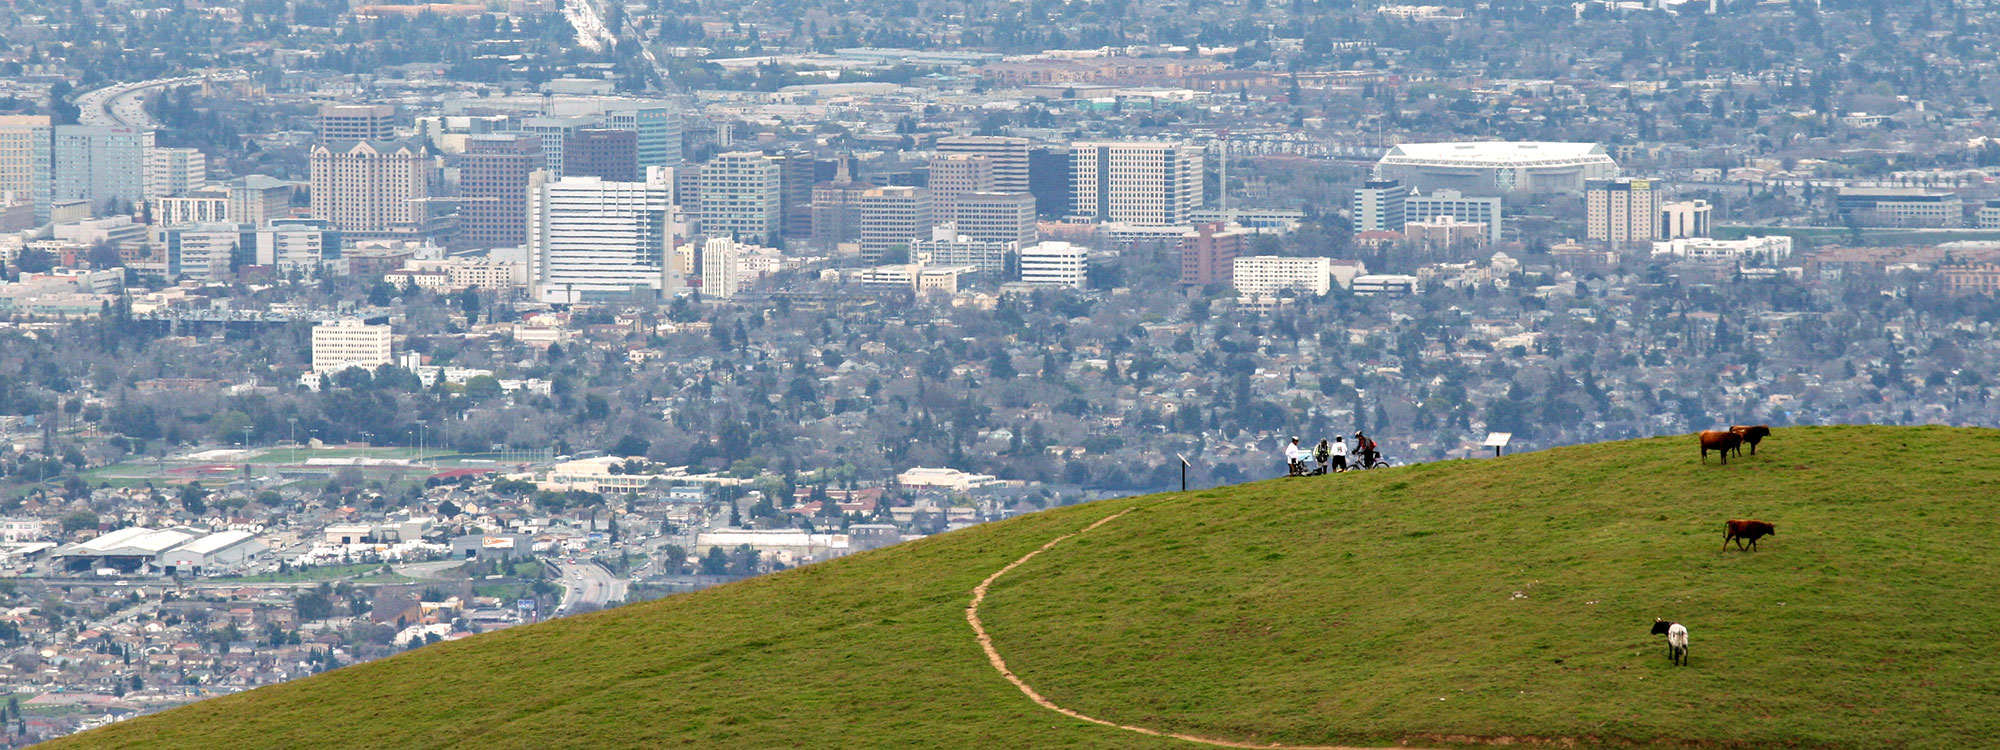 A new vision of a climate smart San Jose will be key to the region's future.